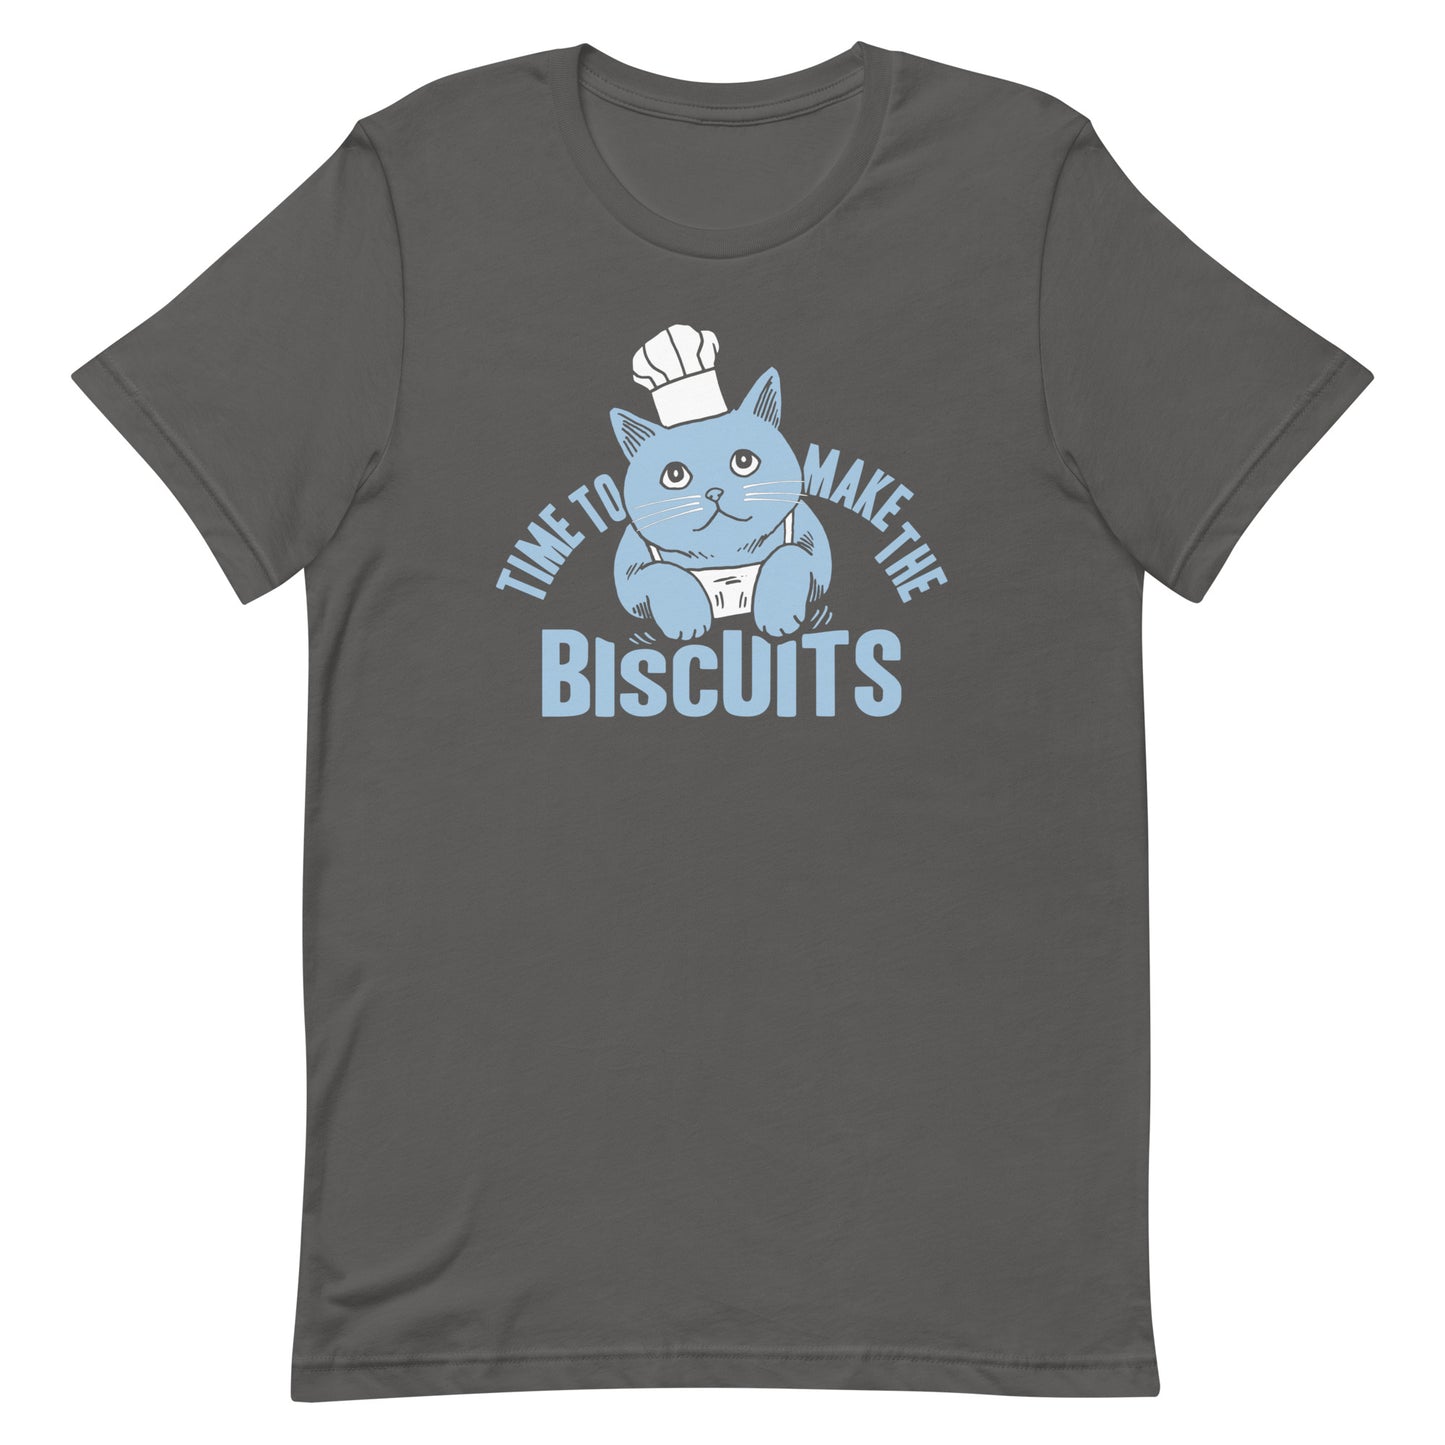 Time To Make The Biscuits Men's Signature Tee